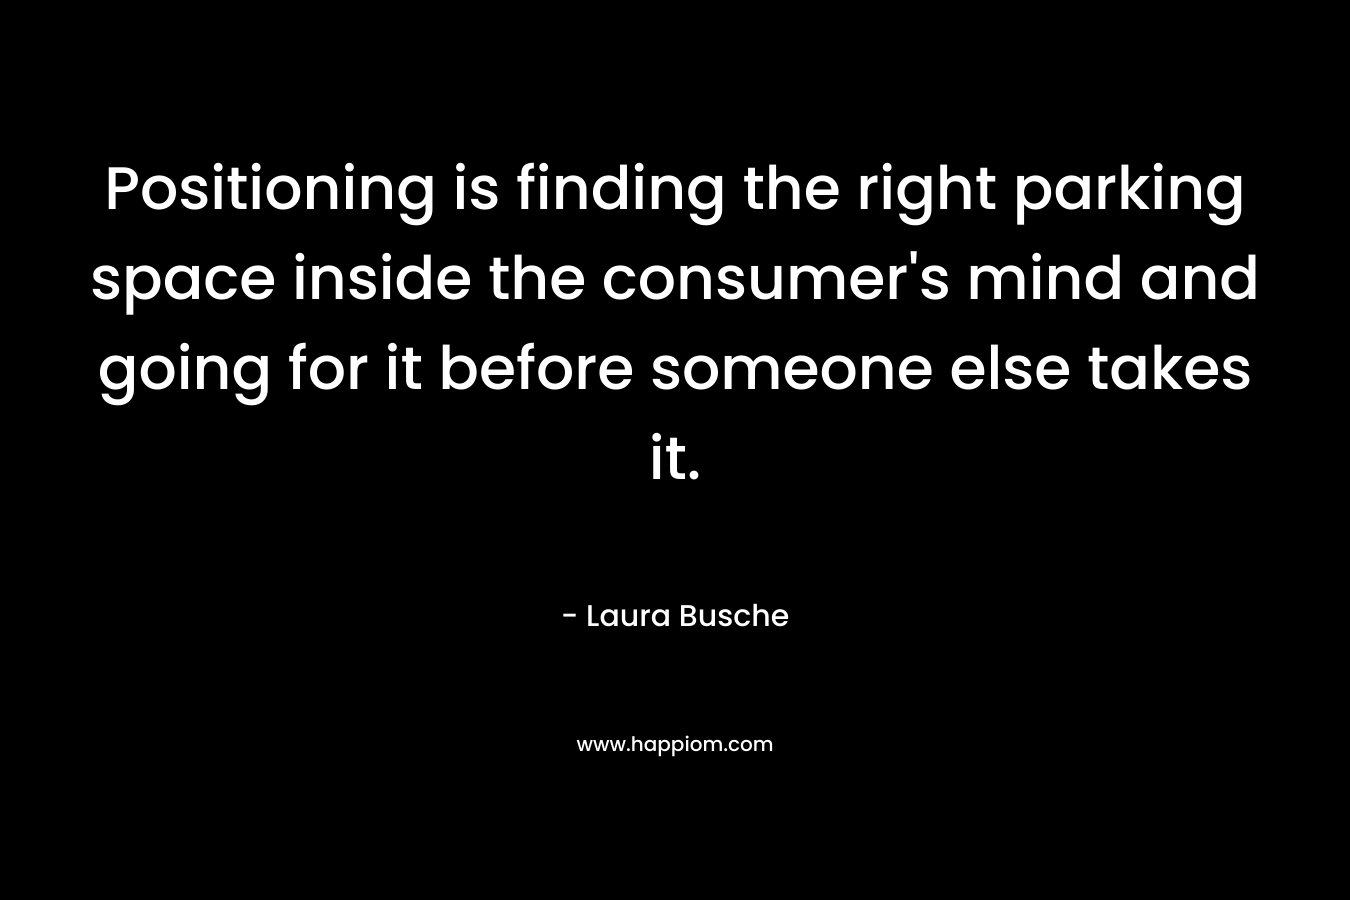 Positioning is finding the right parking space inside the consumer’s mind and going for it before someone else takes it. – Laura Busche